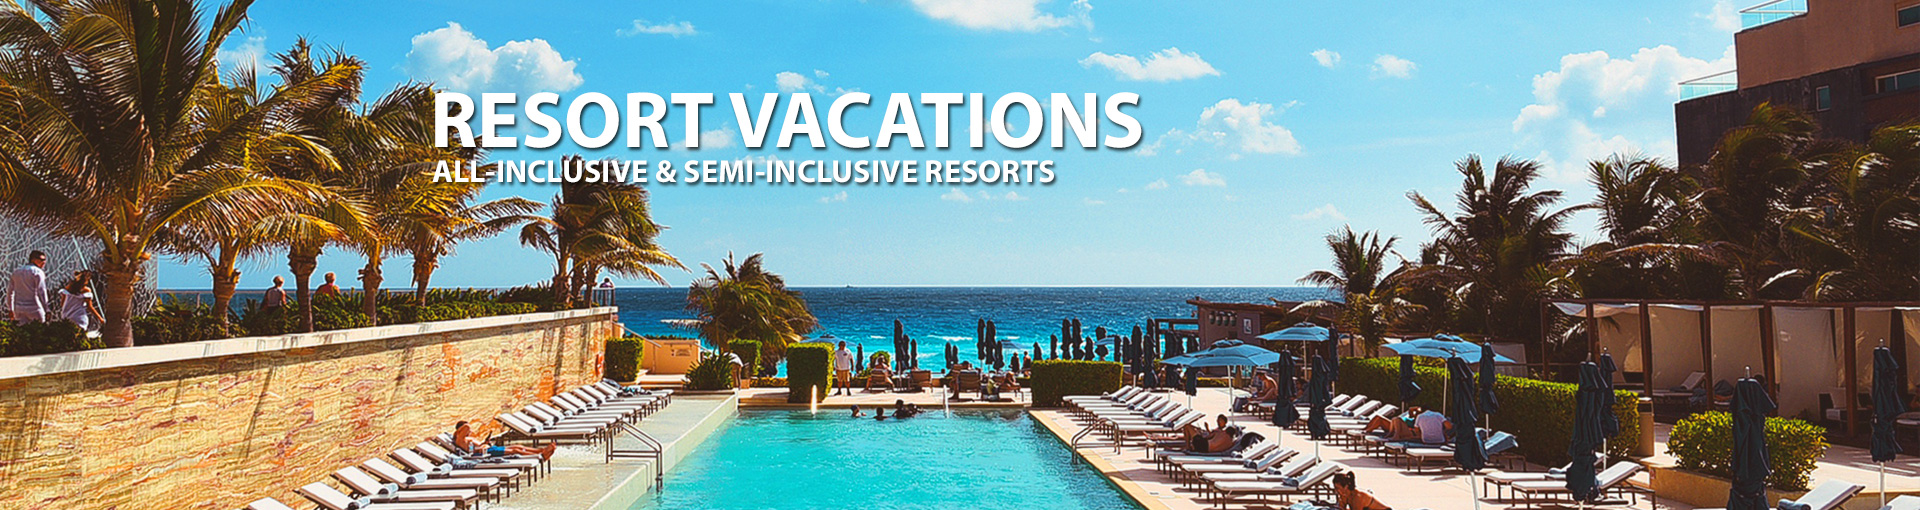 All-Inclusive Resort Vacations Banner